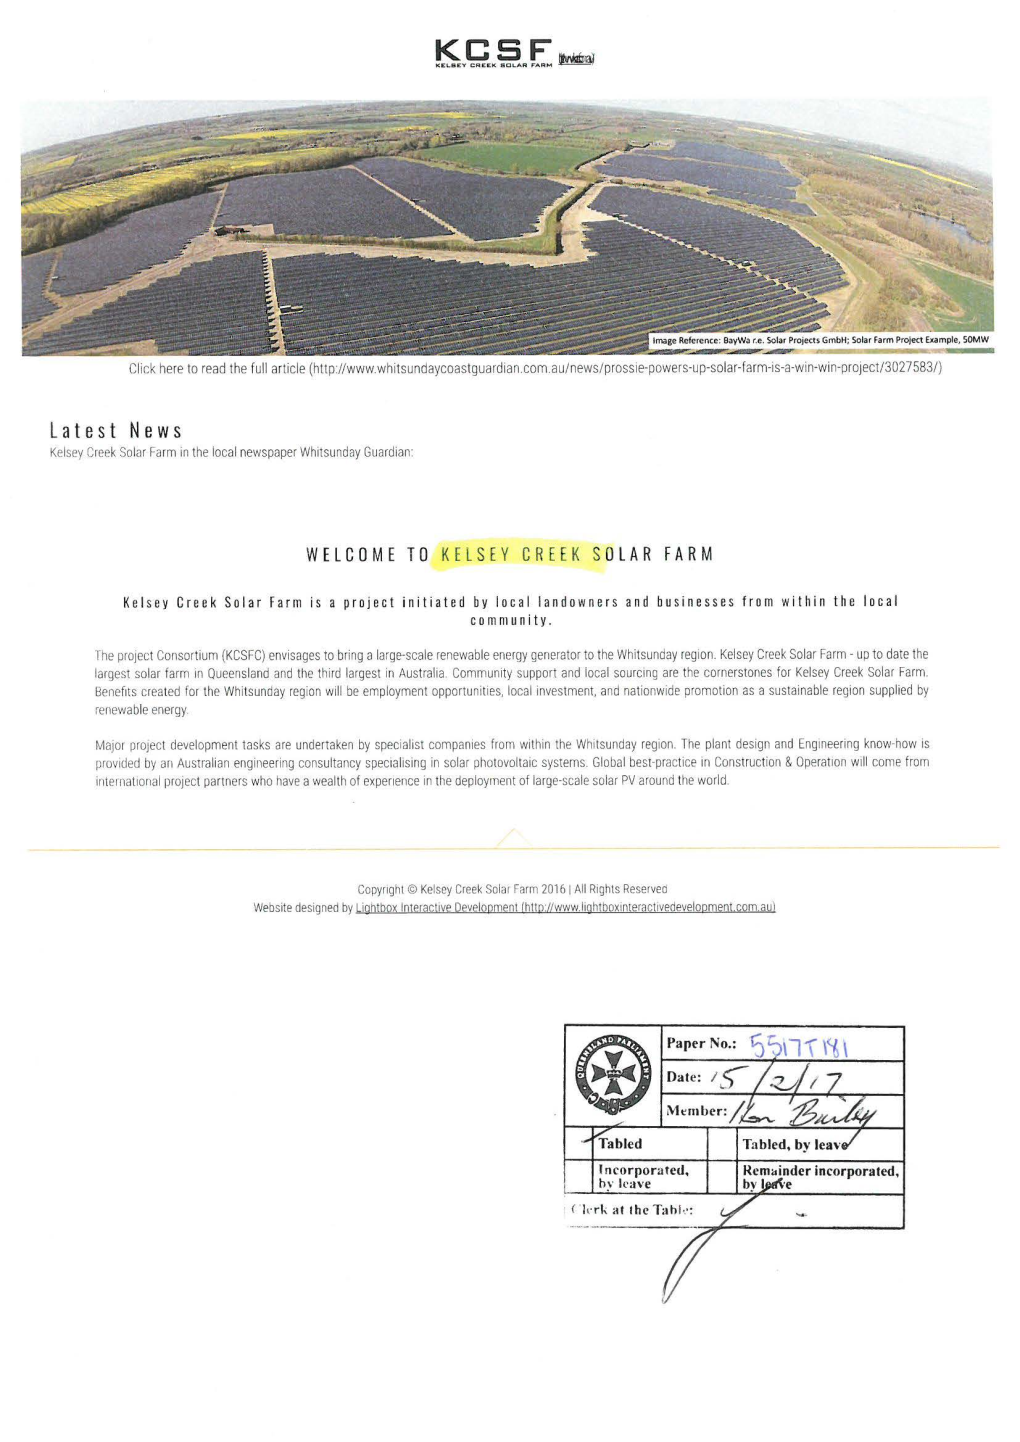 Latest News Kelsey Creek Solar Farm in the Local Newspaper Whitsunday Guardian